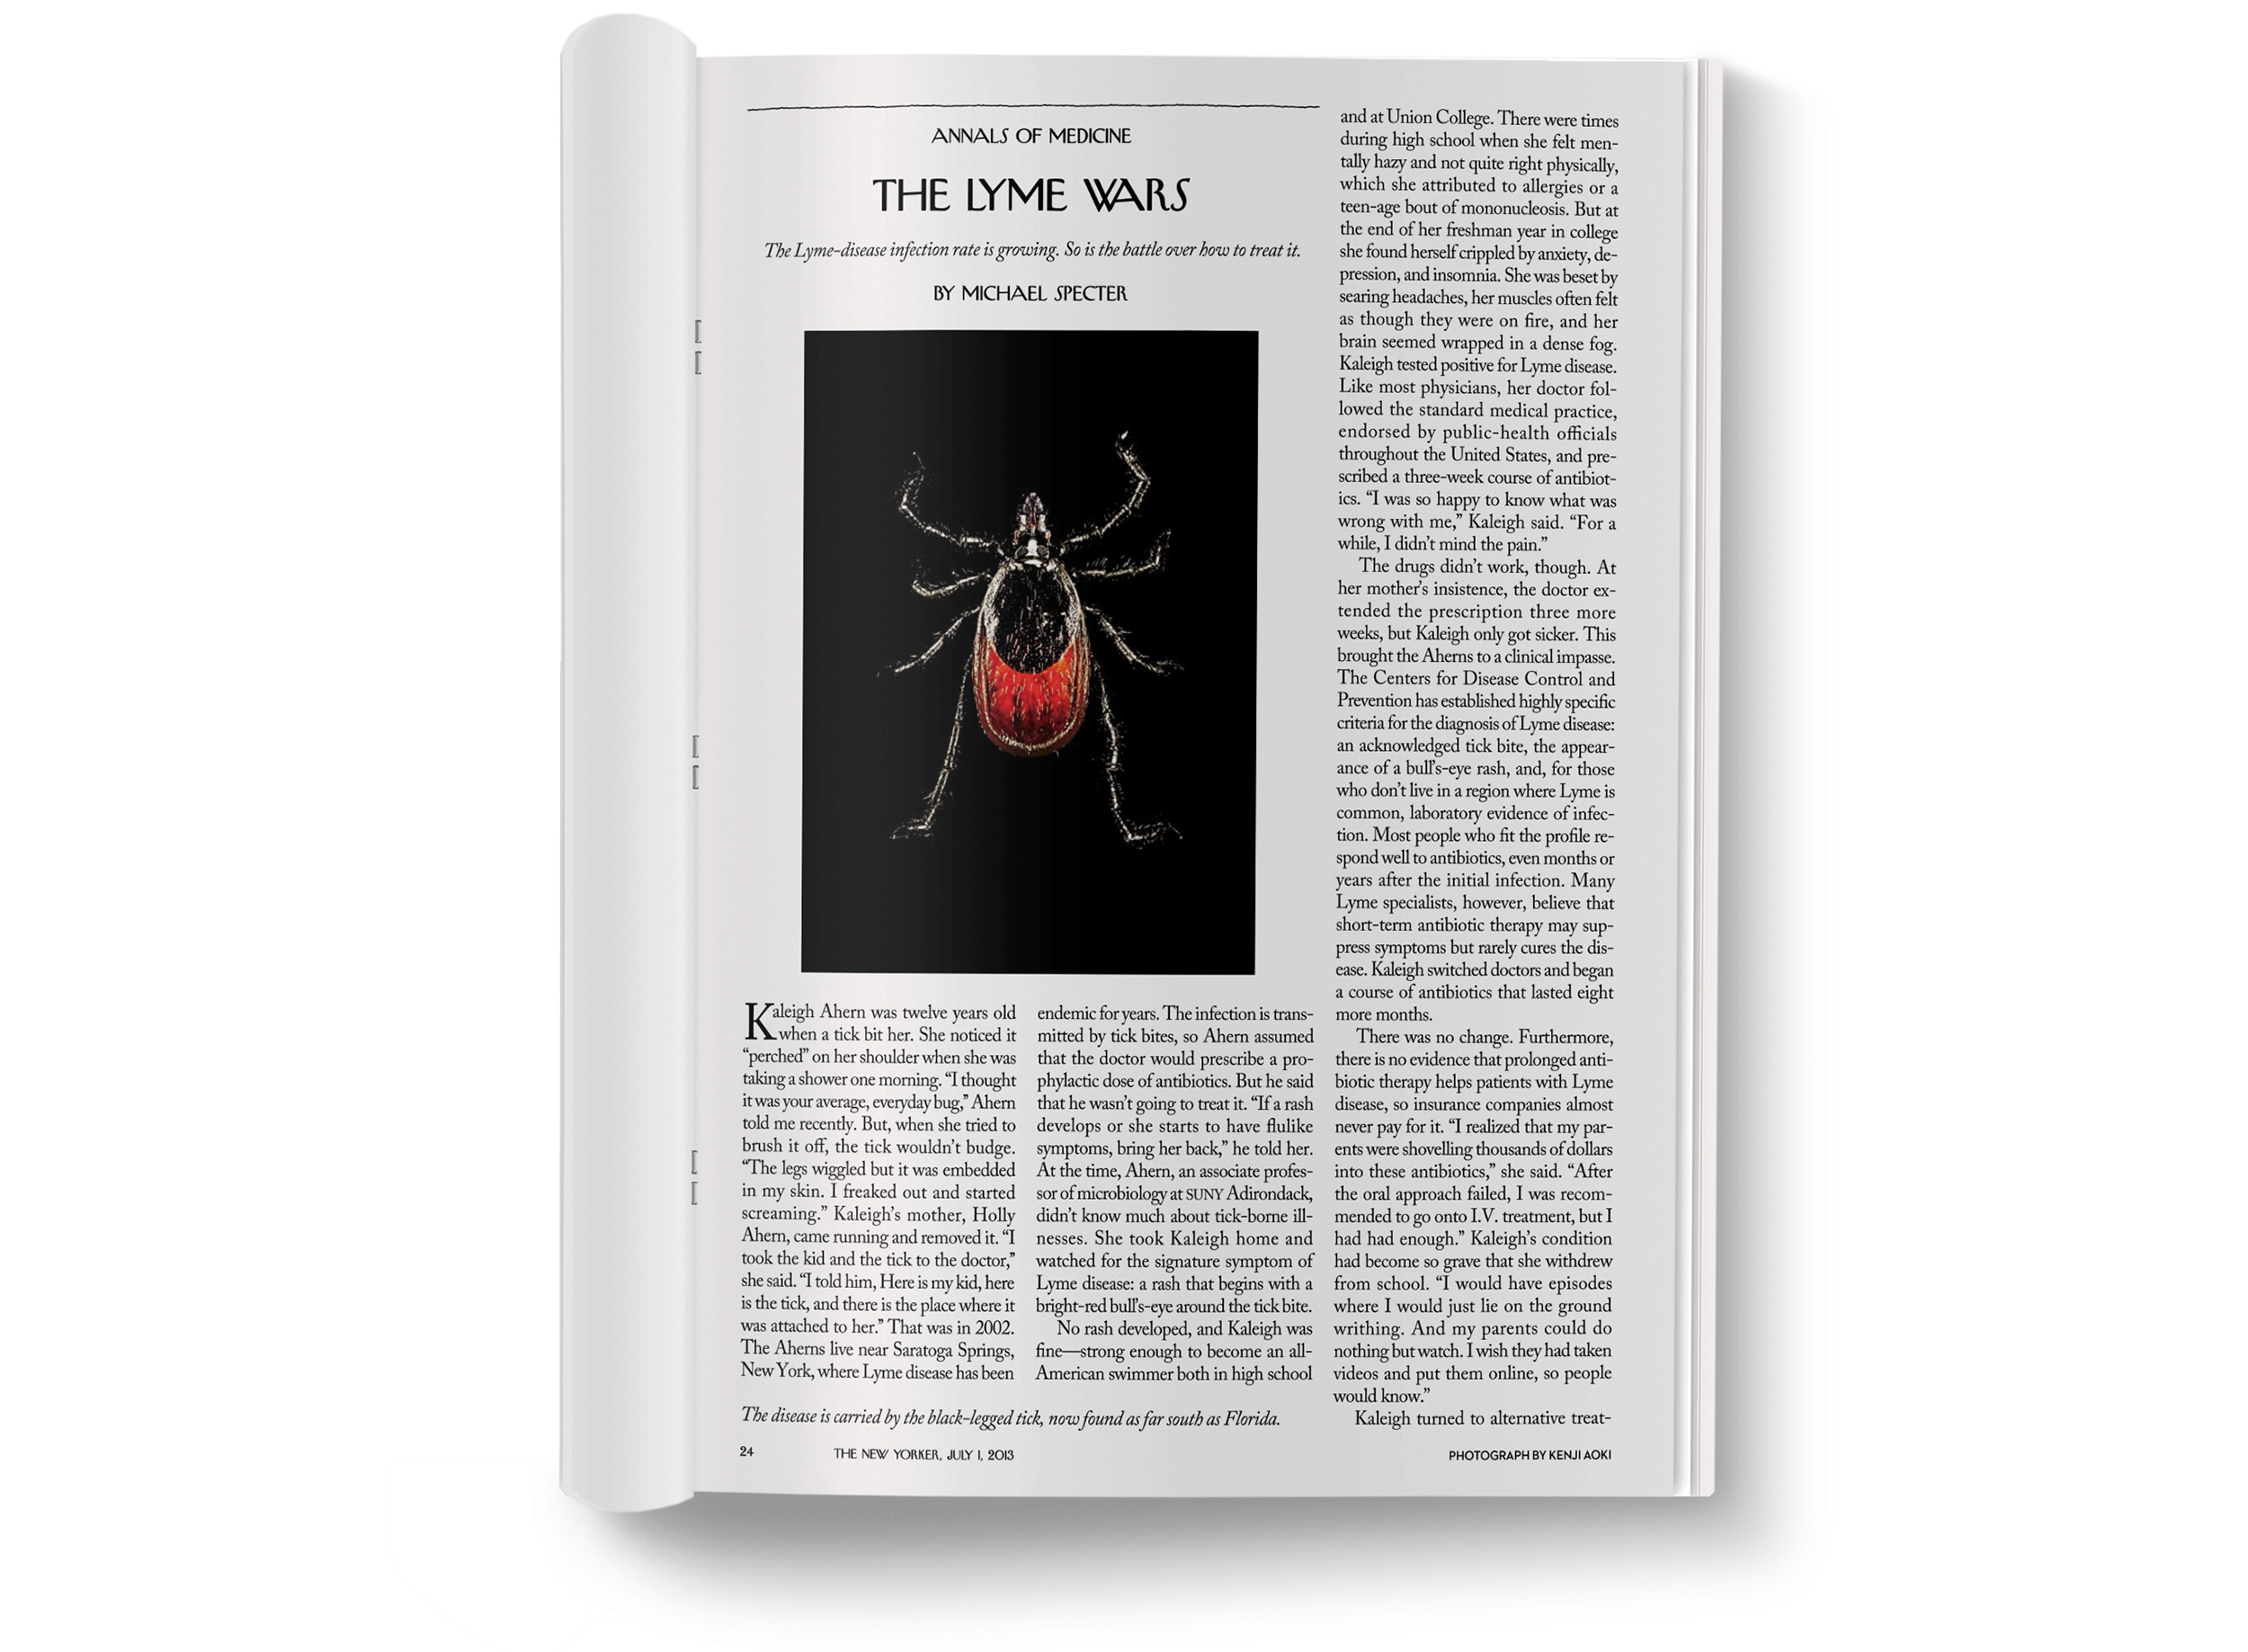   The Lyme Wars  photographed by  Kenji Aoki . 